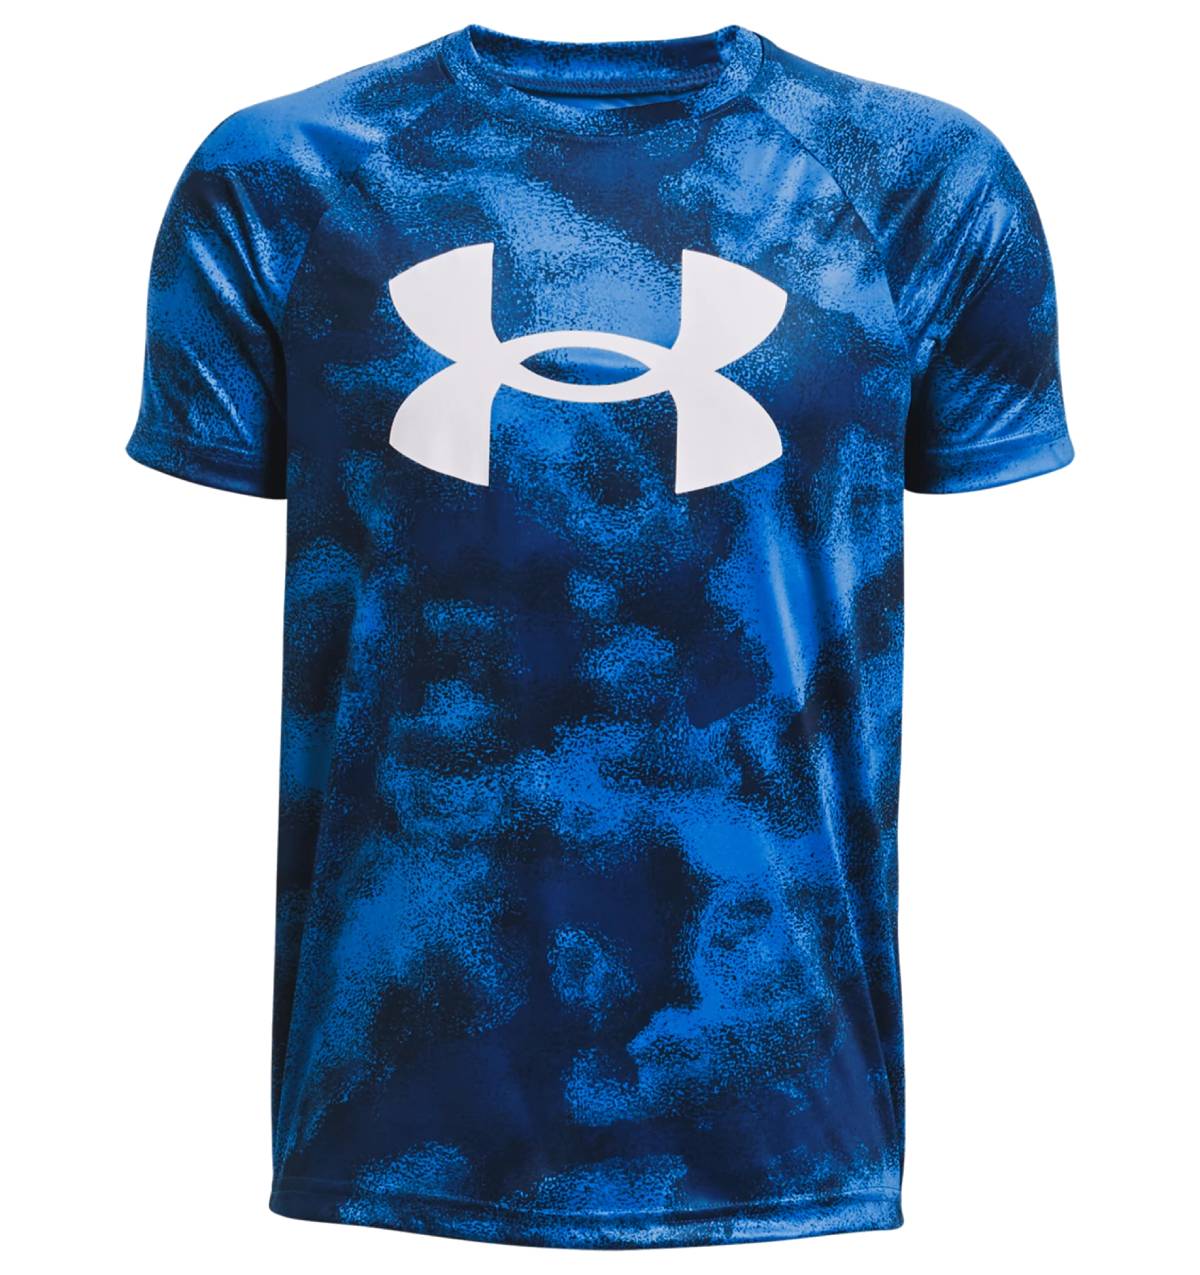 Under Armour Kids Sportstyle Logo Printed Tee Grey L